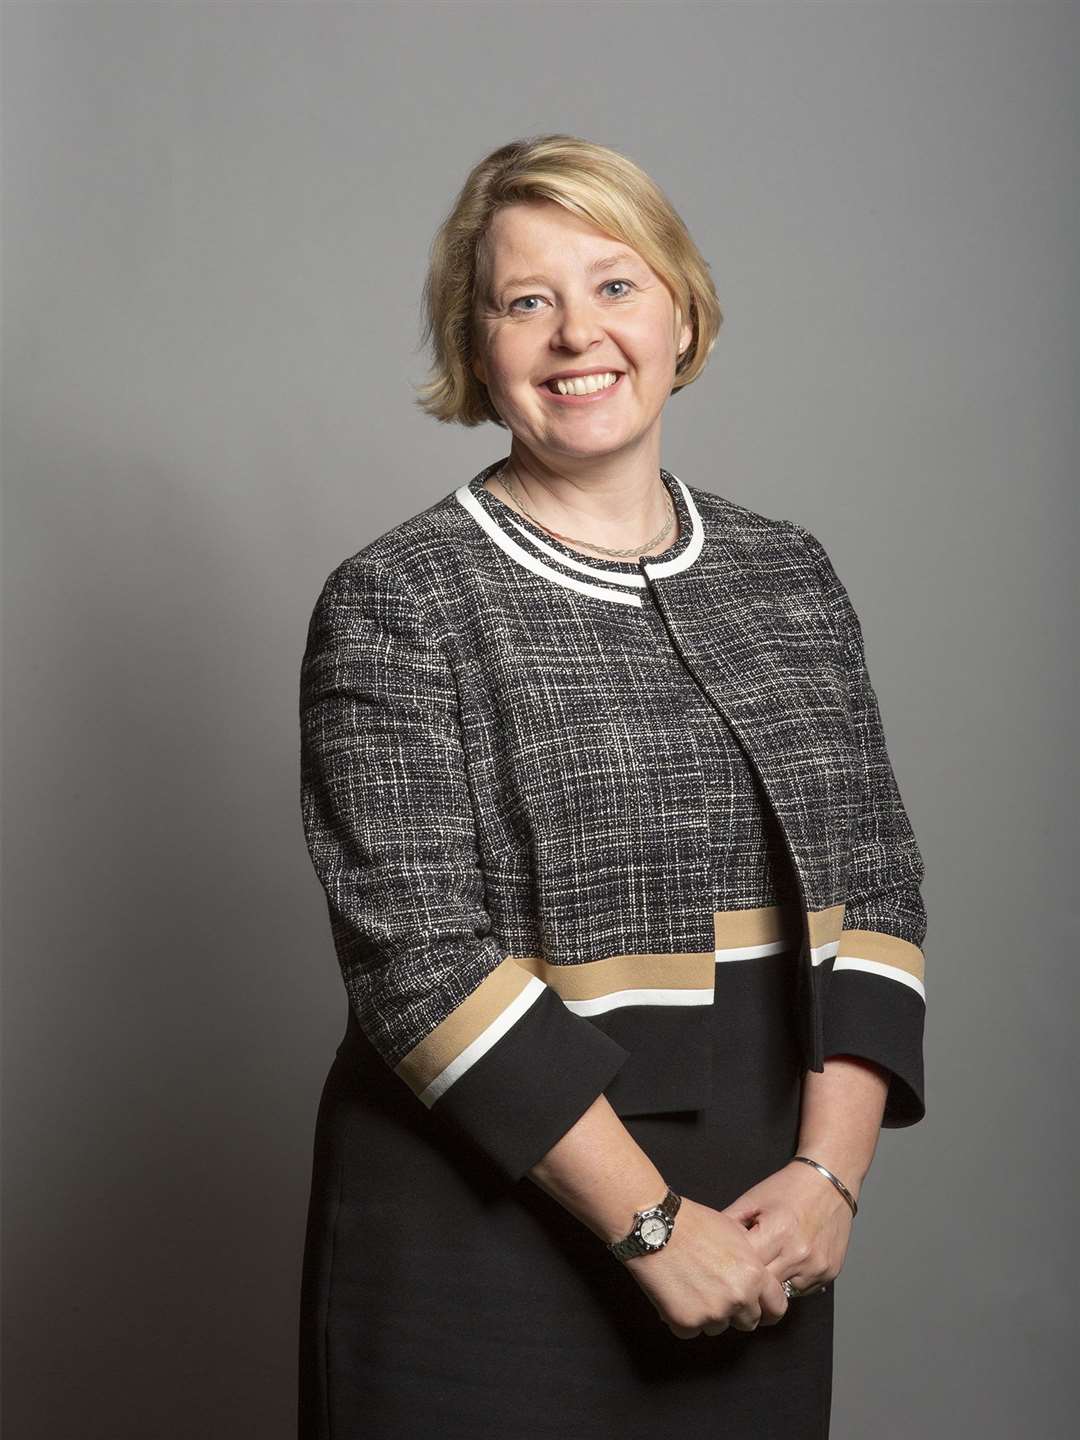 Conservative MP for Cities of London and Westminster, Nickie Aiken (David Wollfall/UK Parliament/PA)